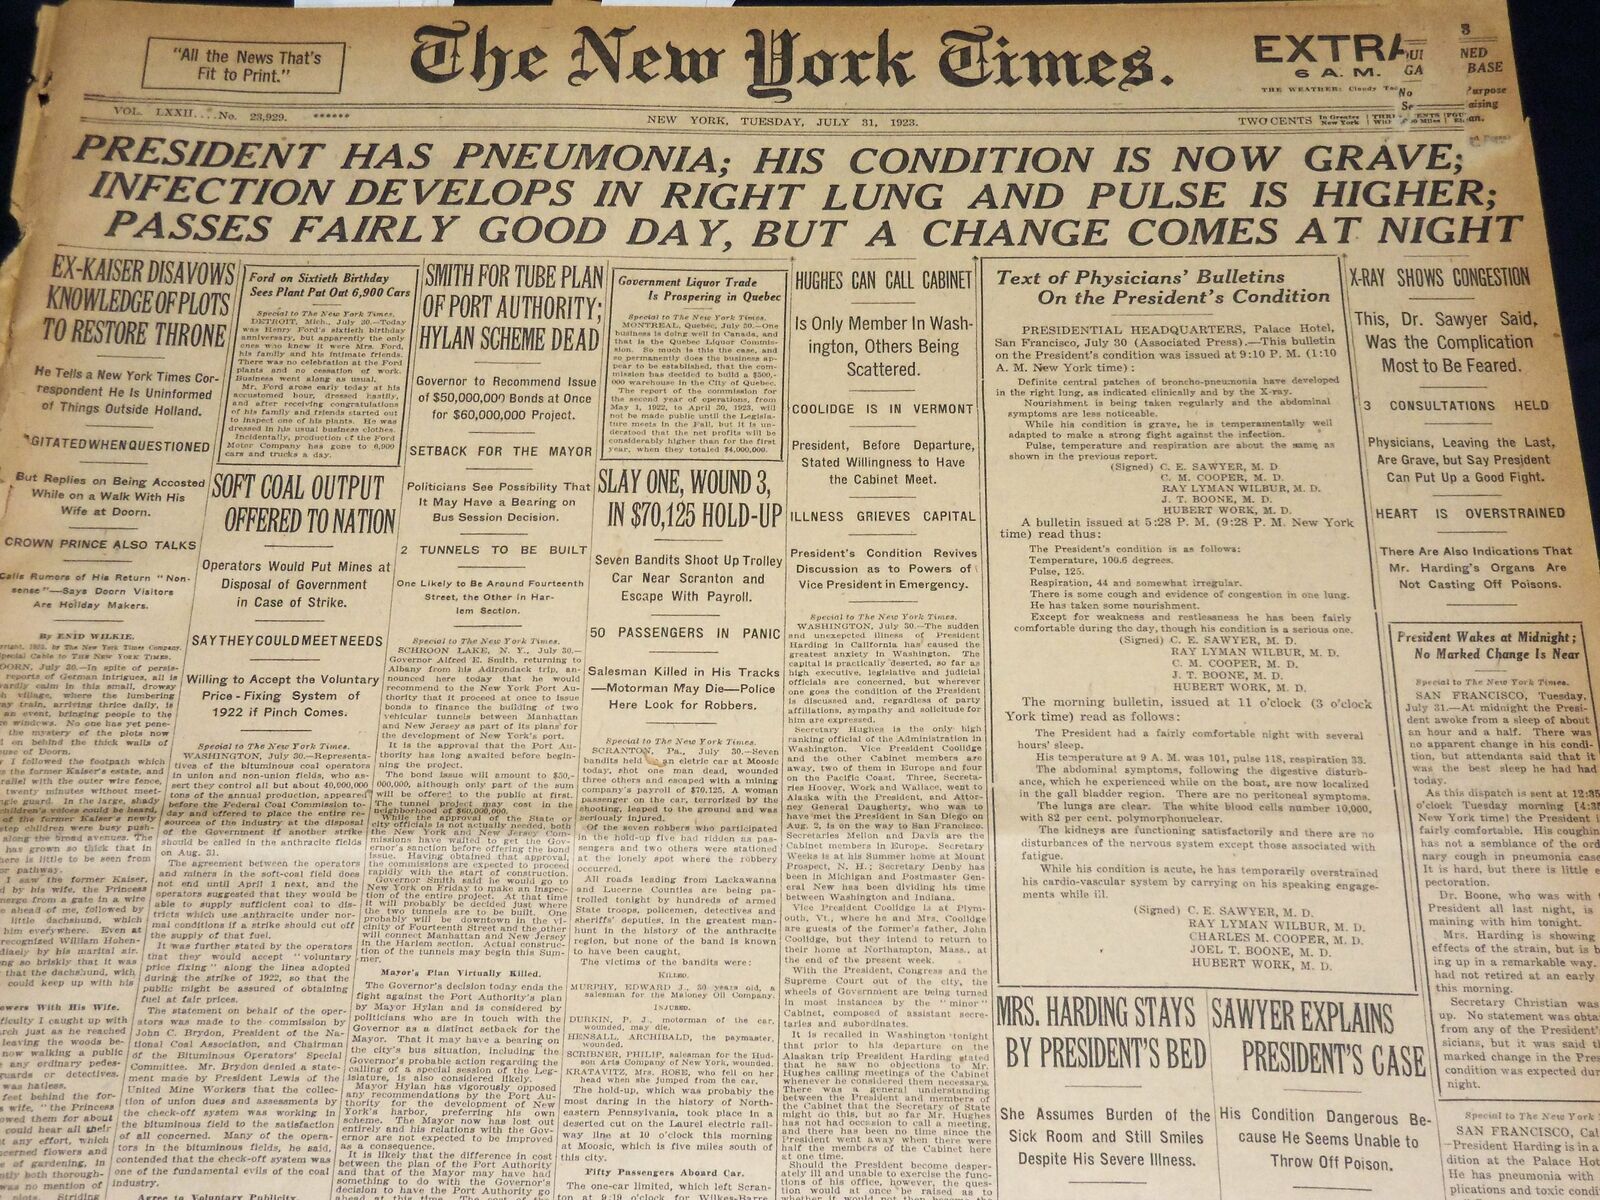 1923 JULY 31 NEW YORK TIMES - PRESIDENT HAS PNEUMONIA - CONDITION GRAVE- NT 7750